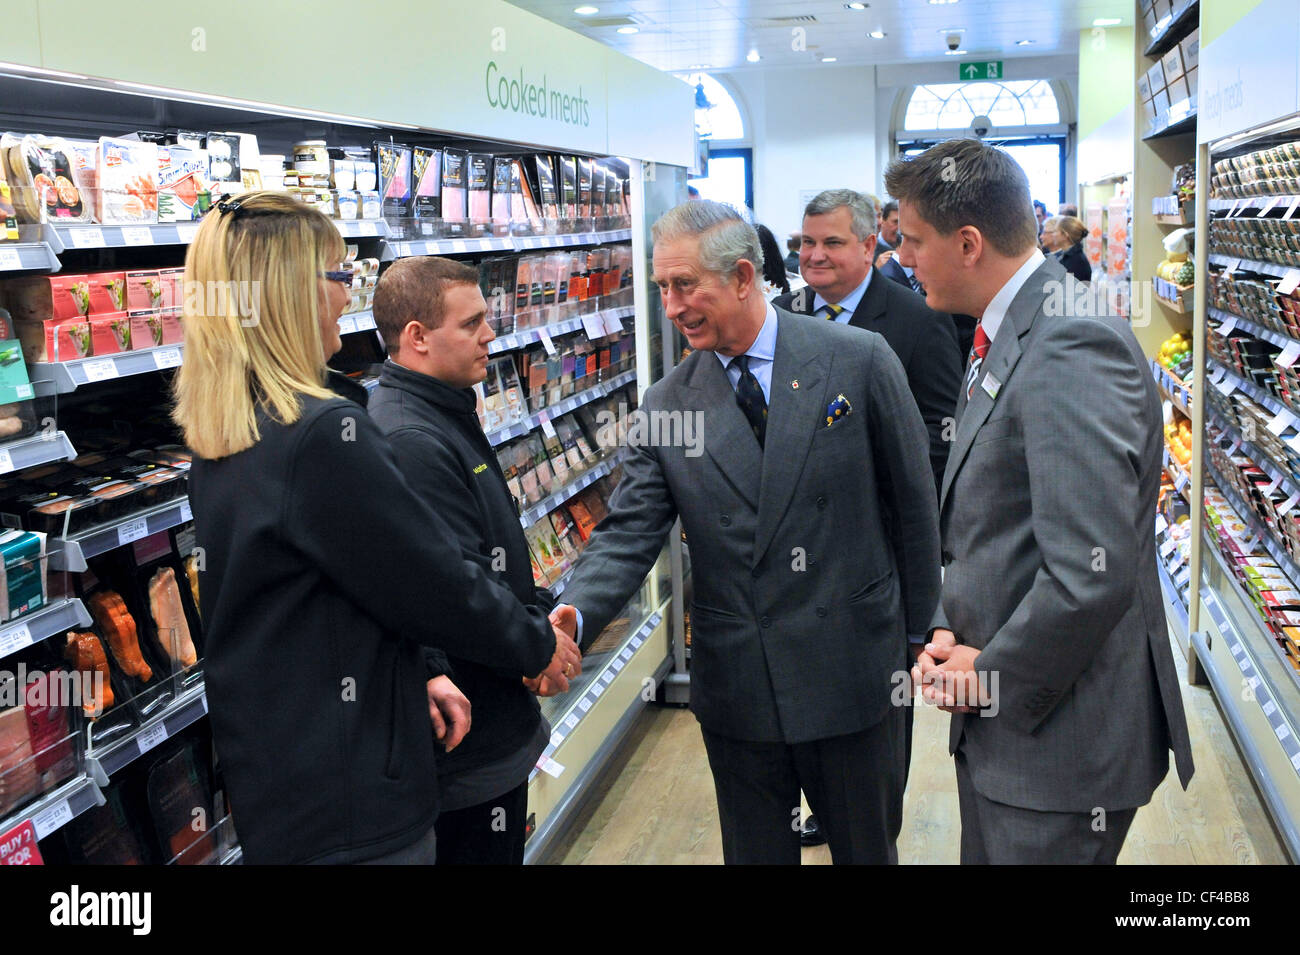 Prince Charles opens Little Waitrose Supermarket in Poundbury, Dorset UK, meets and talks to Waitrose staff and suppliers. Stock Photo